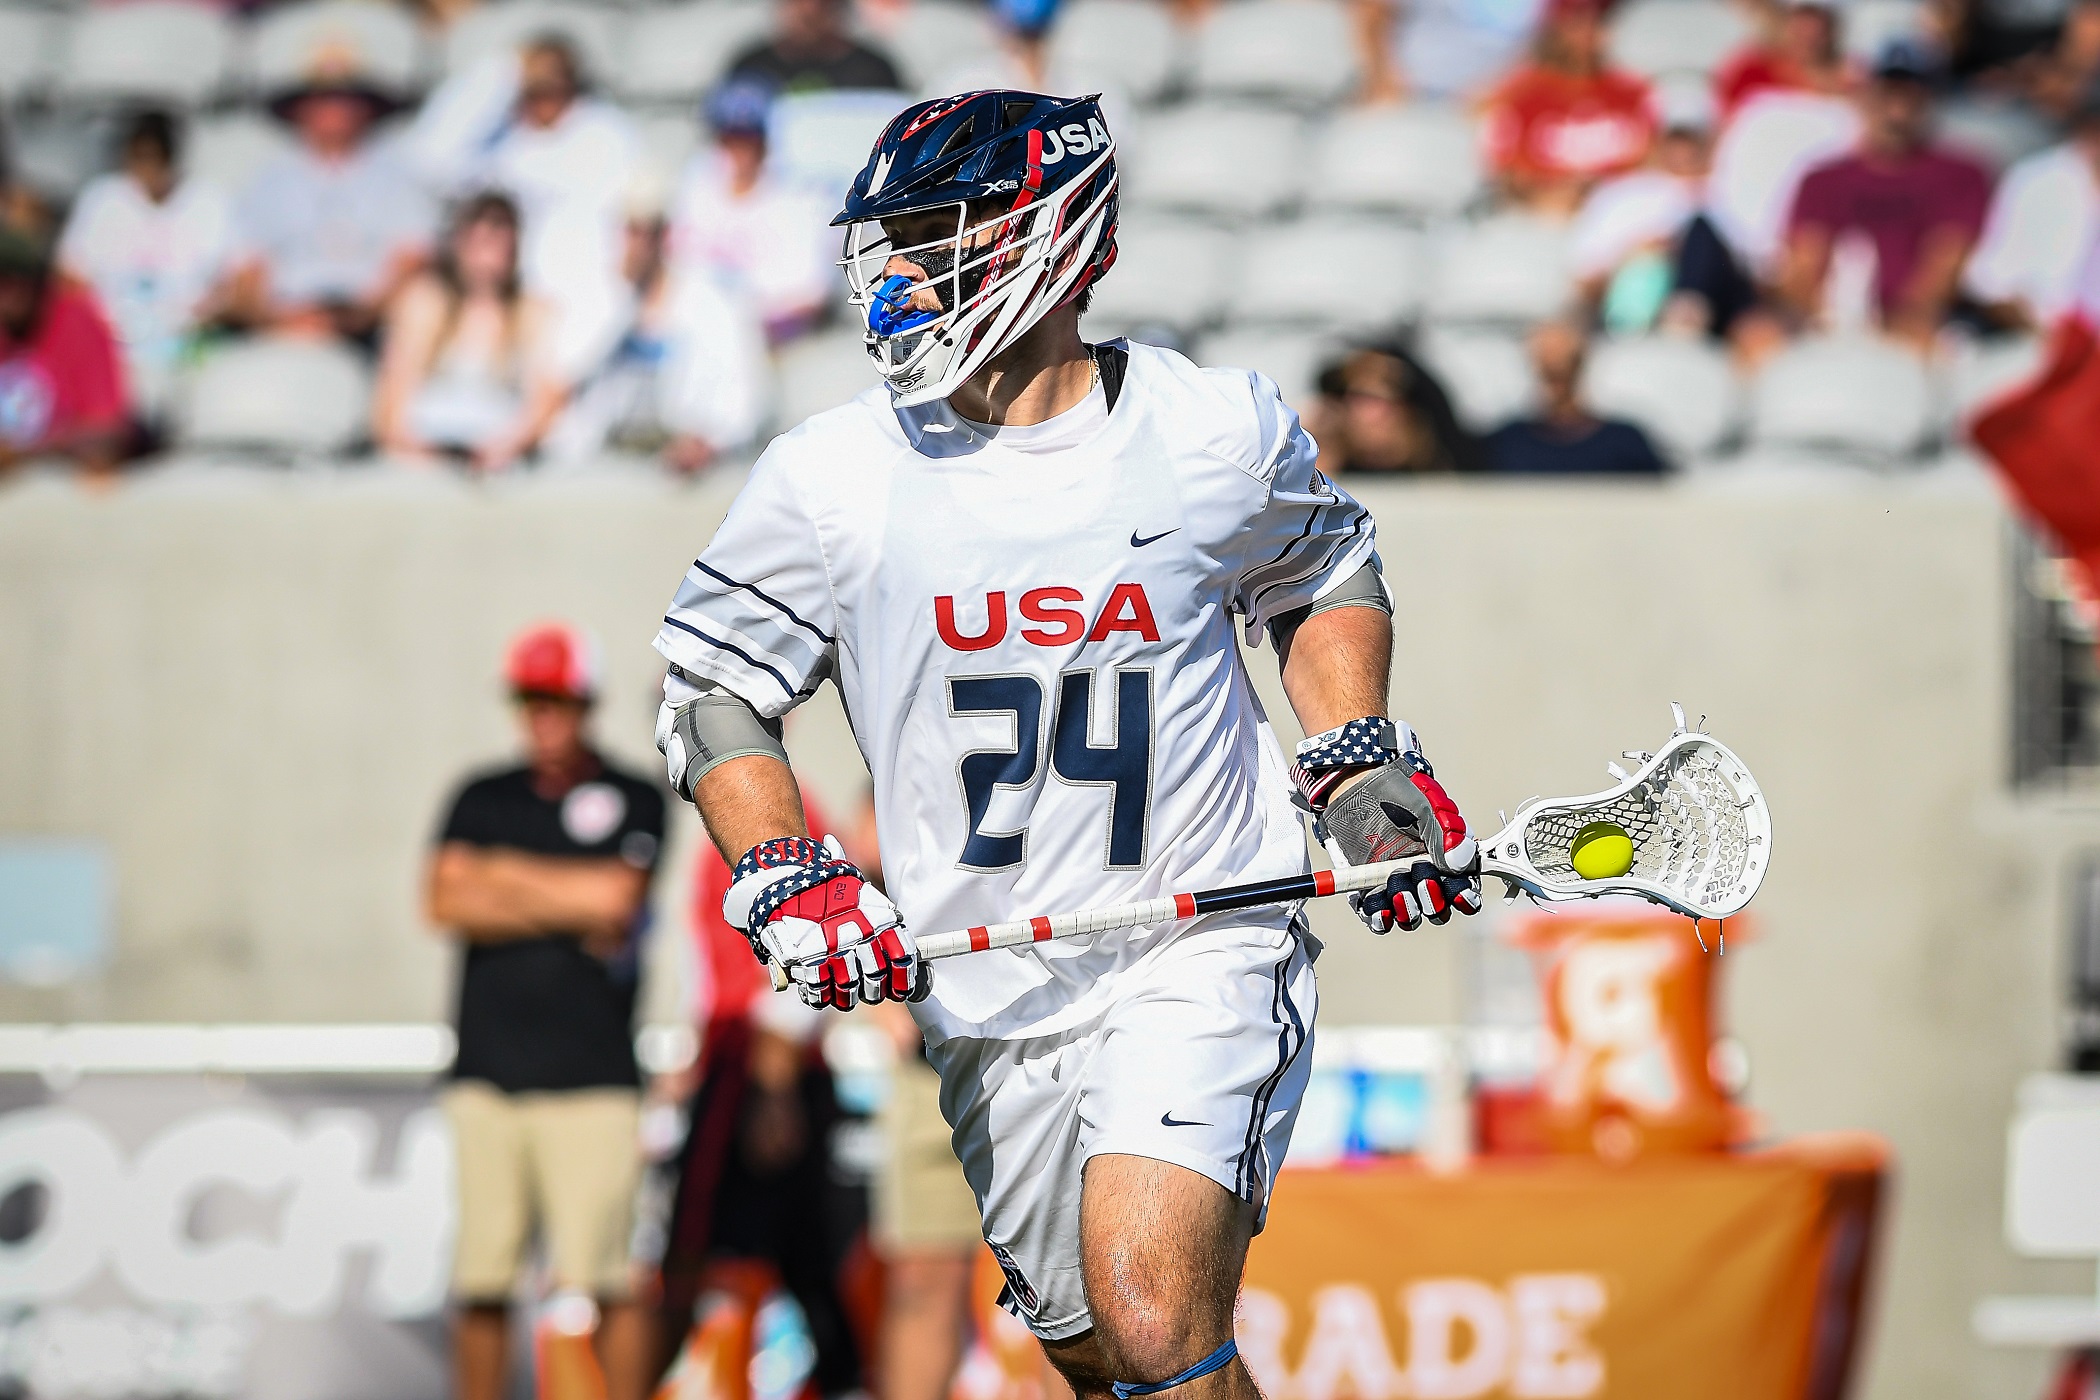 United States wins 2023 World Lacrosse Men’s Championship in San Diego